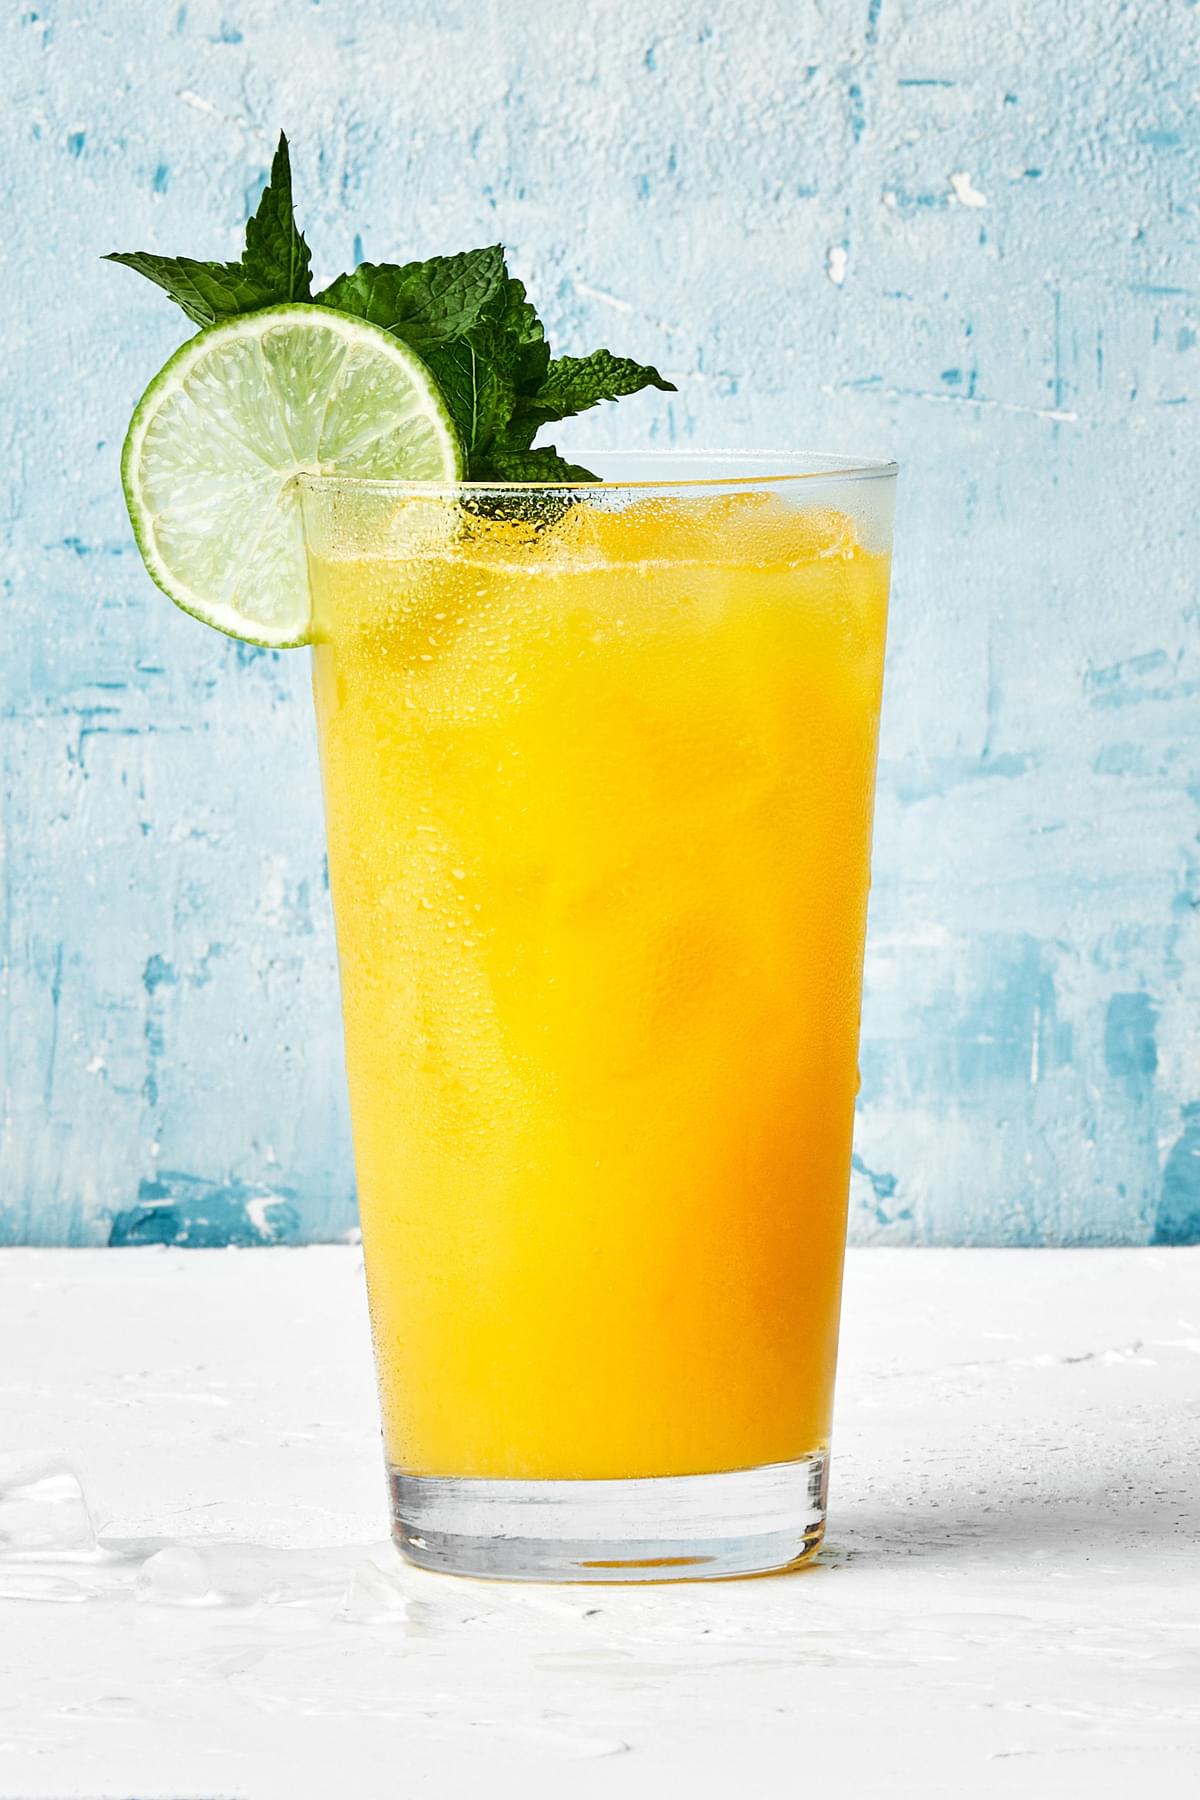 a glass of mango aqua fresca served over ice and garnished with fresh mint springs and a lime wedge